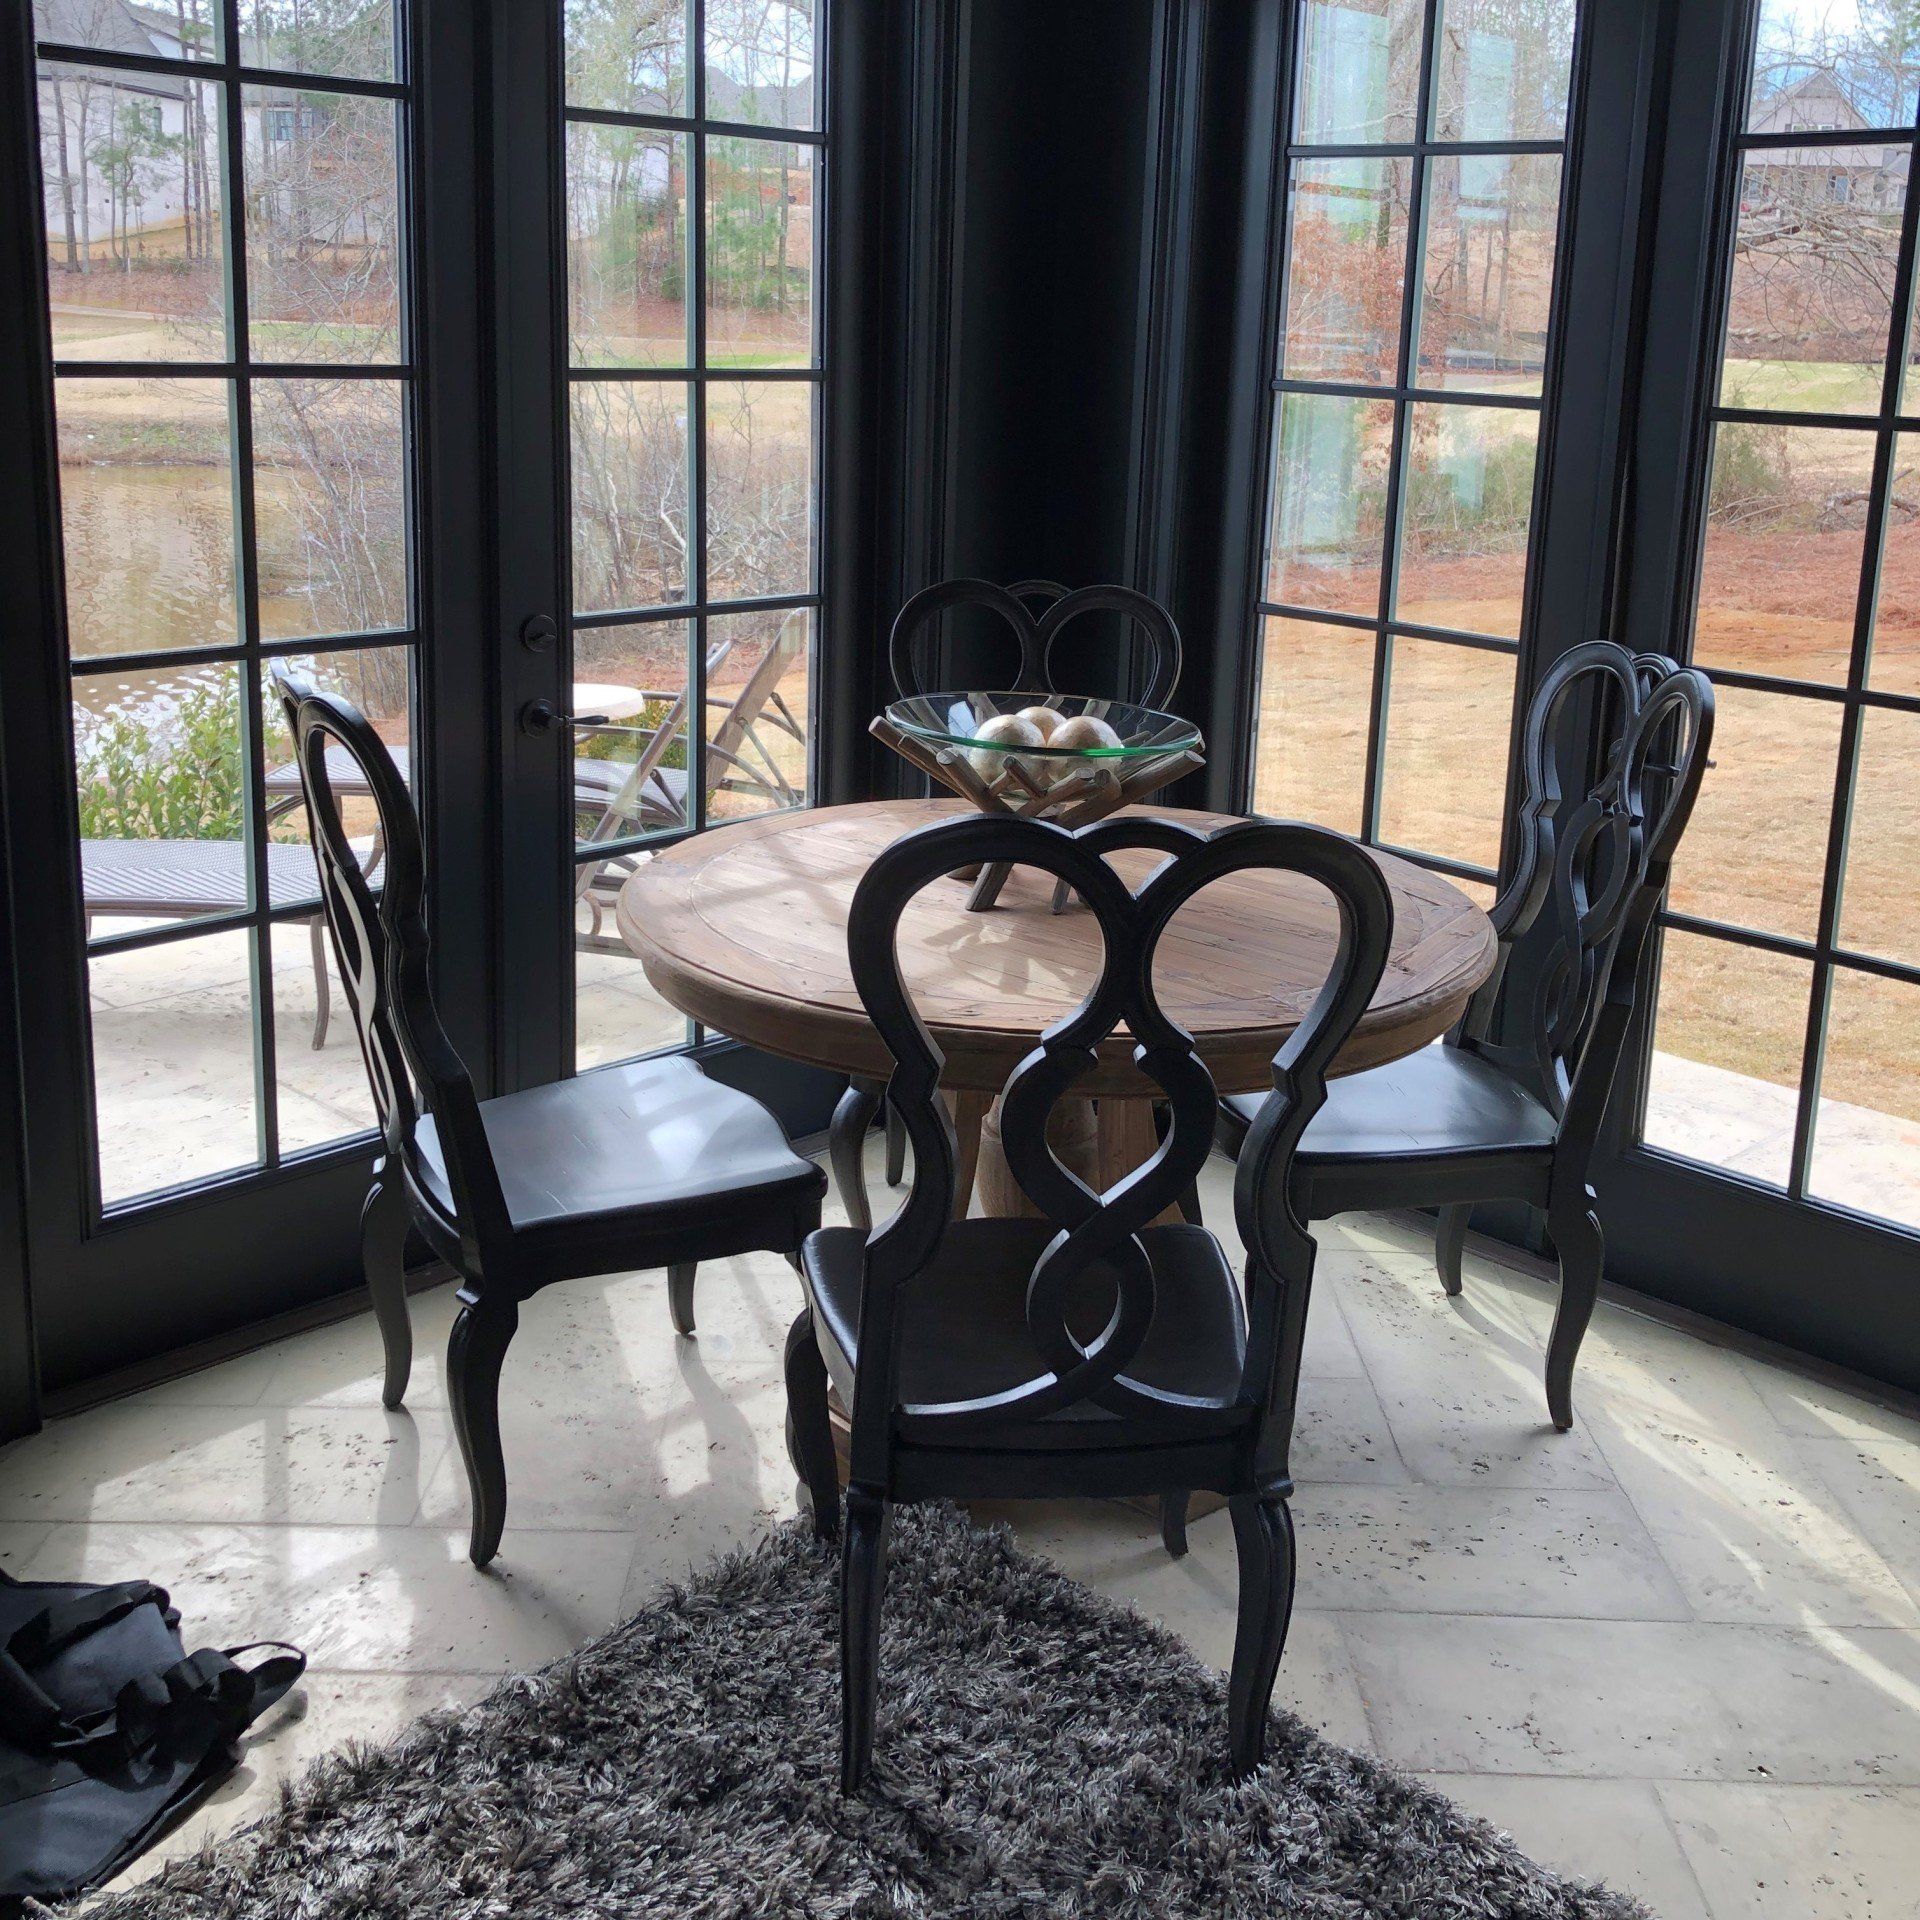 home window tinting in Auburn AL - SPF Performance Rose Gold residential tint stopped bright Sun from blasting through dining room windows in Auburn AL